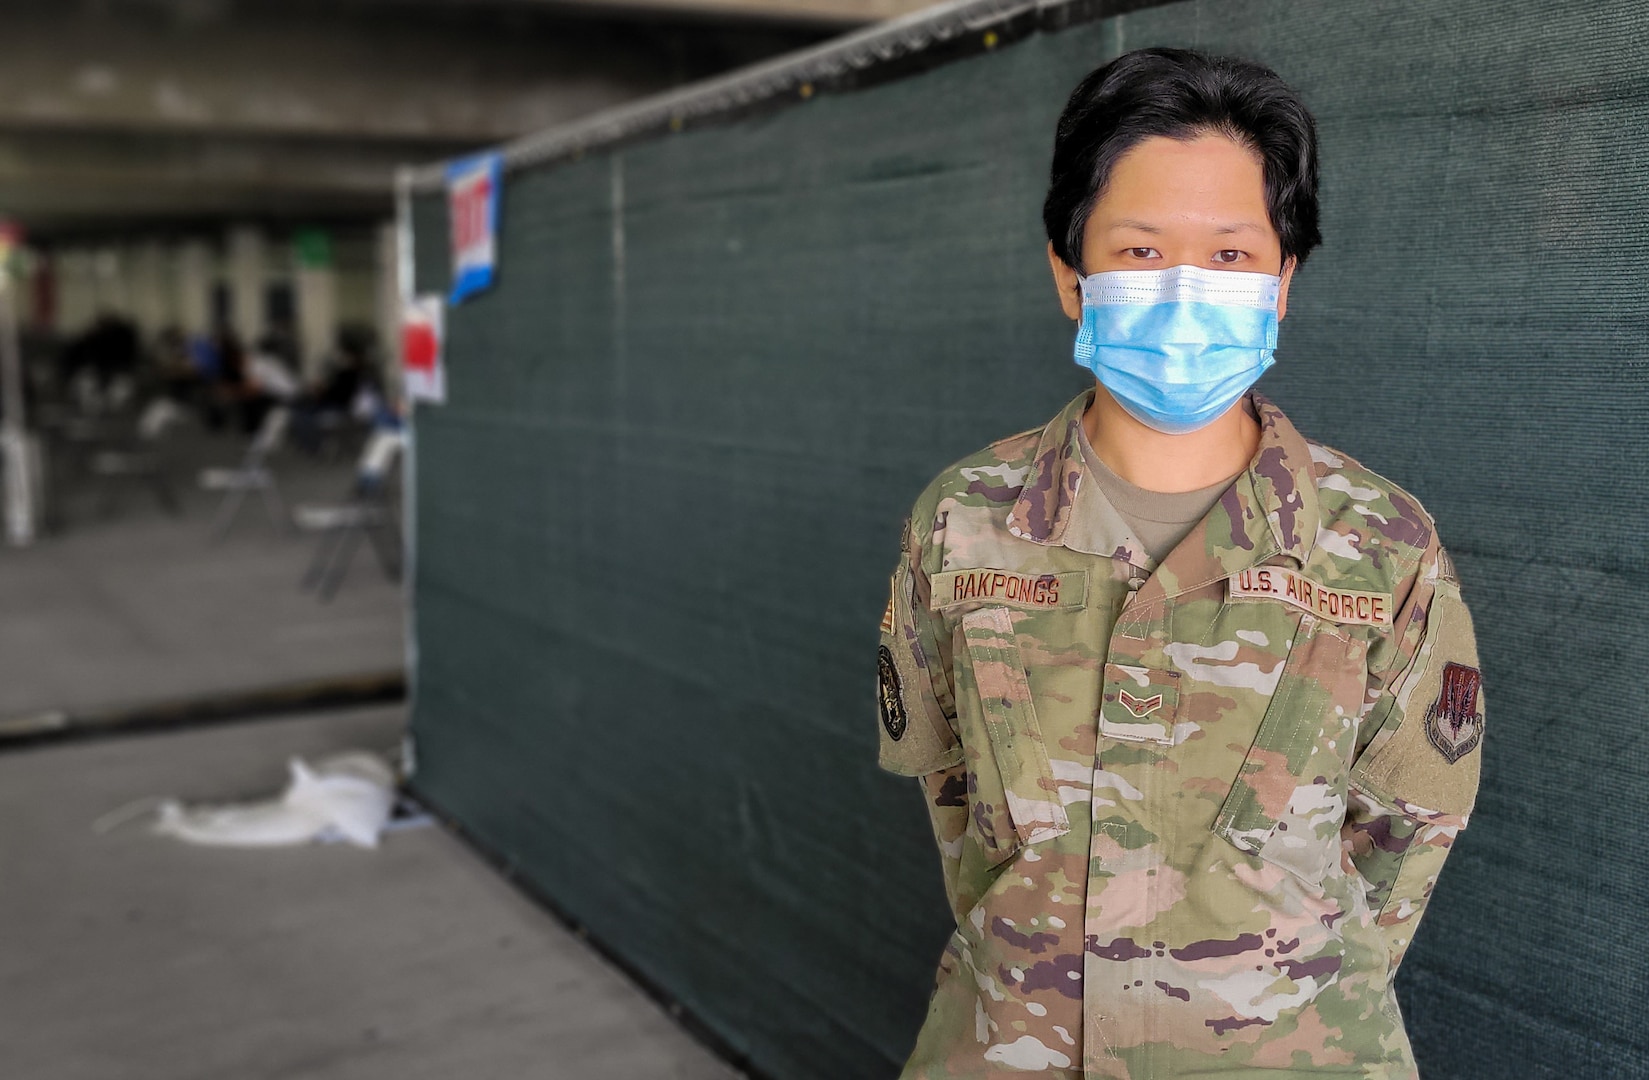 U.S. Air Force Airman 1st Class Piyaporn Rakpongs, a fleet management and analysis specialist with the 147th Combat Communications Squadron, California National Guard, monitors the walk-up site at the community vaccination center at California State University Los Angeles, March 8, 2021. Rakpongs grew up in Thailand before joining the Cal Guard.